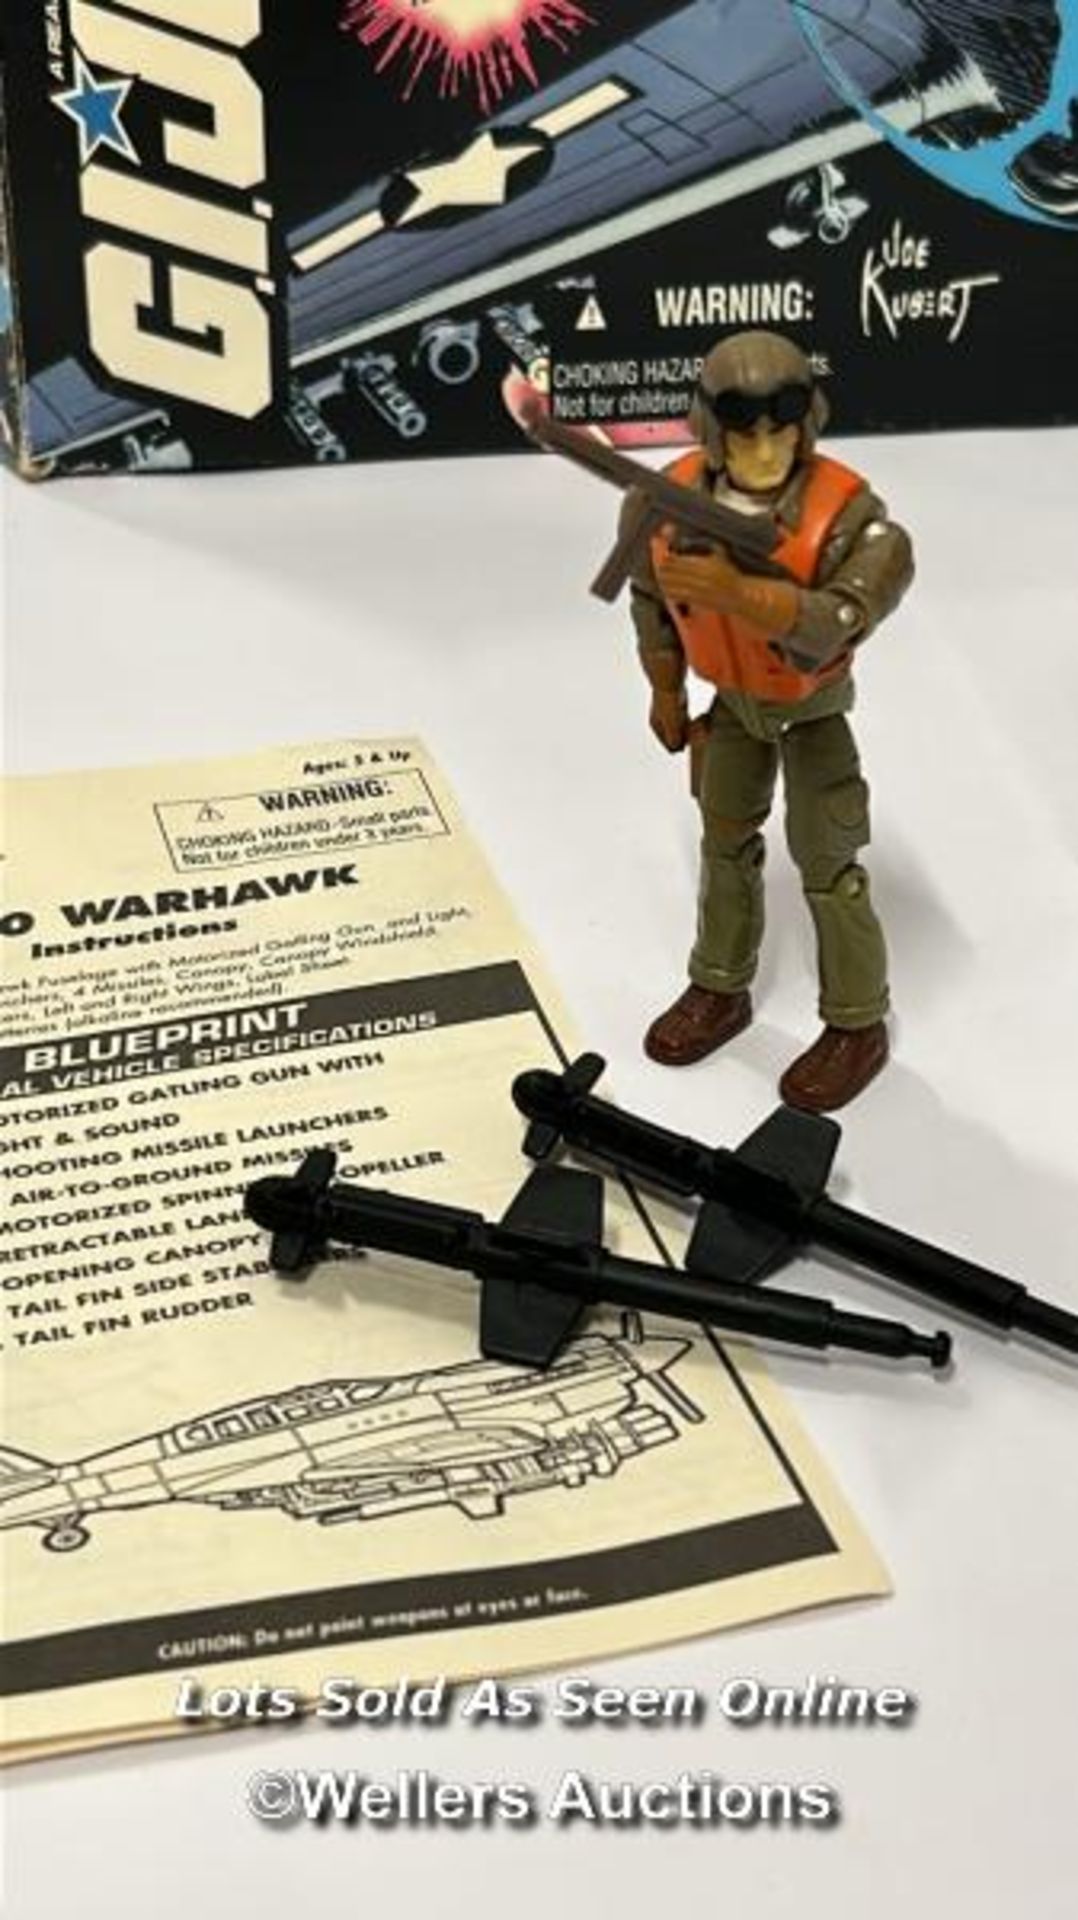 Hasbro GI Joe boxed P-40 Warhawk plane with St. Savage action figure, in fair condition with working - Image 4 of 4